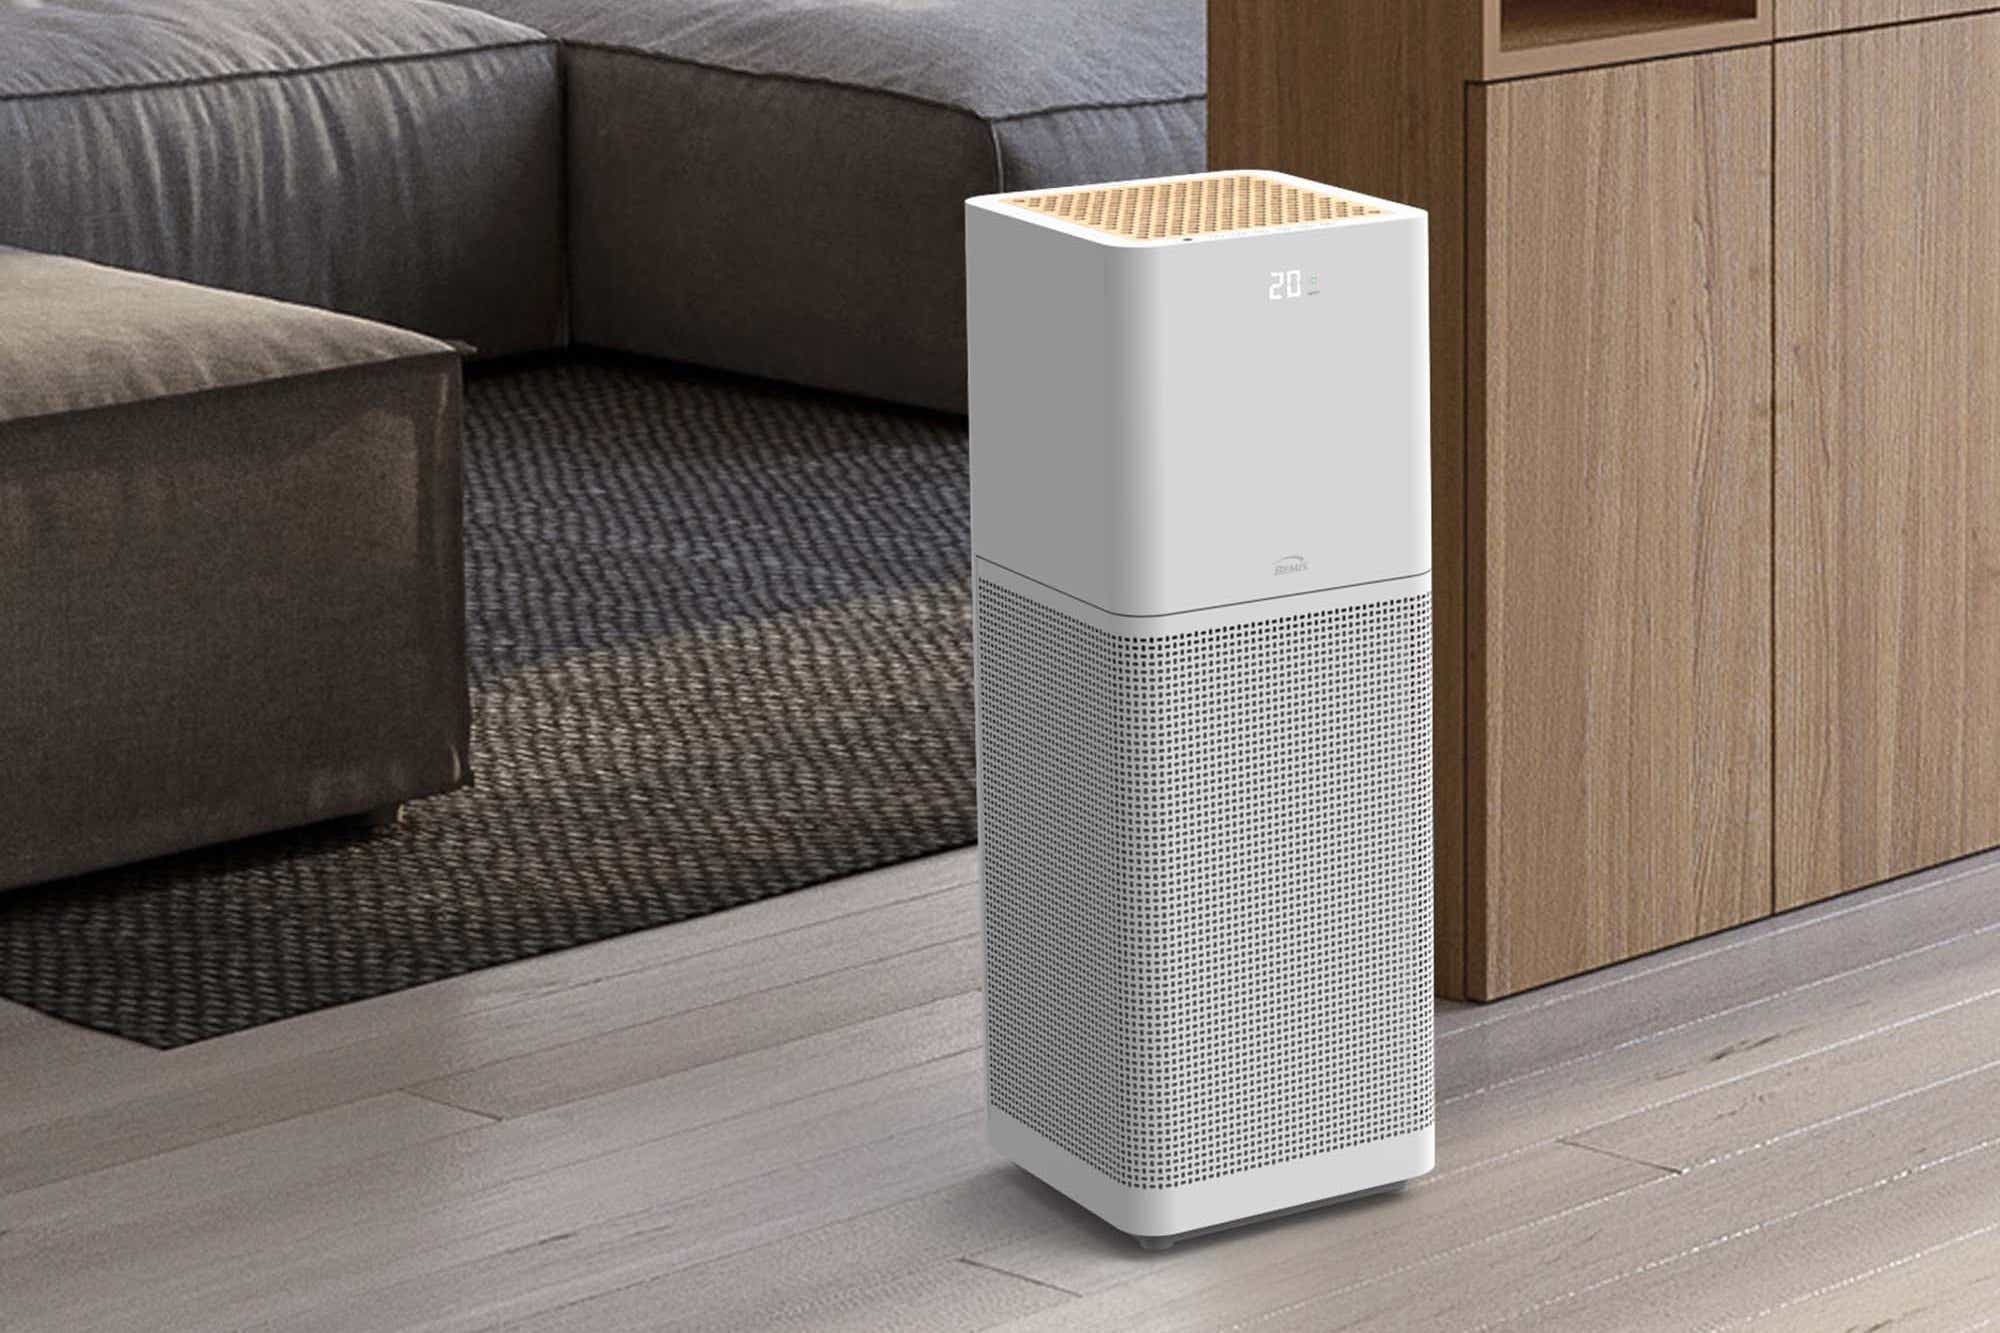 Best air purifiers 2022: Reviews and buying advice | TechHive